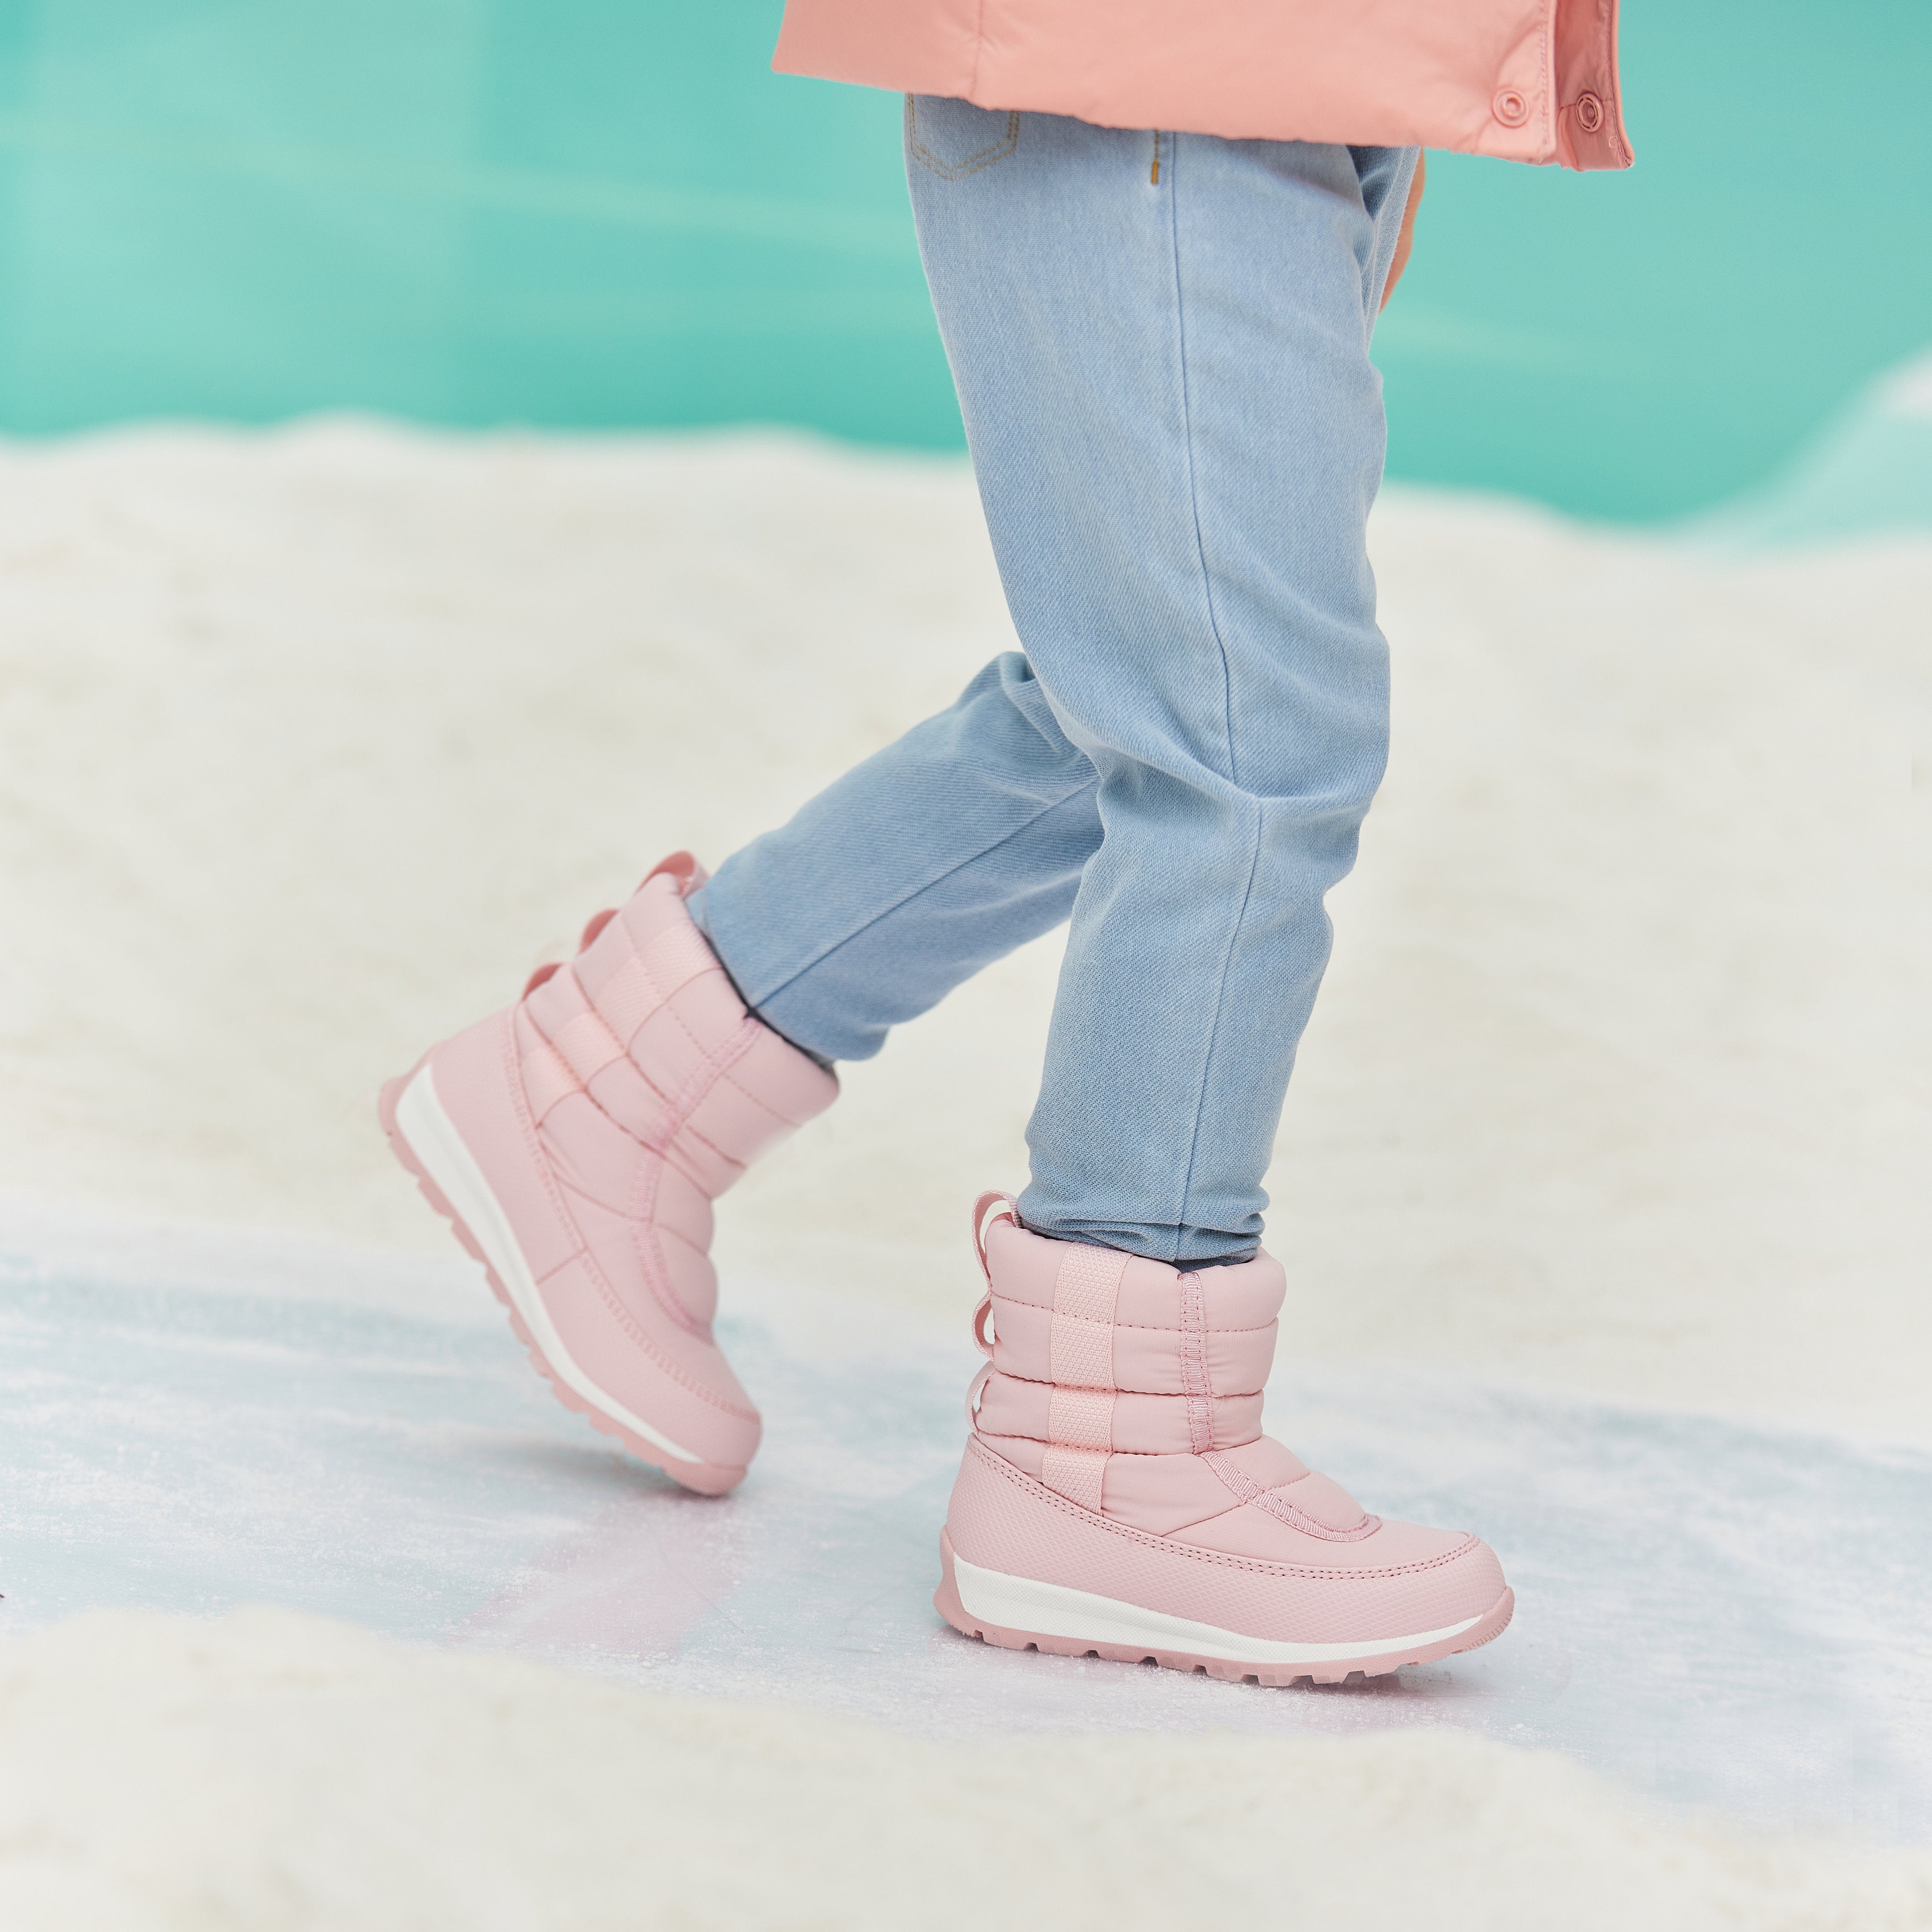 Girls Boys Winter Essential Cold Weather Water Resistance Snow Boots